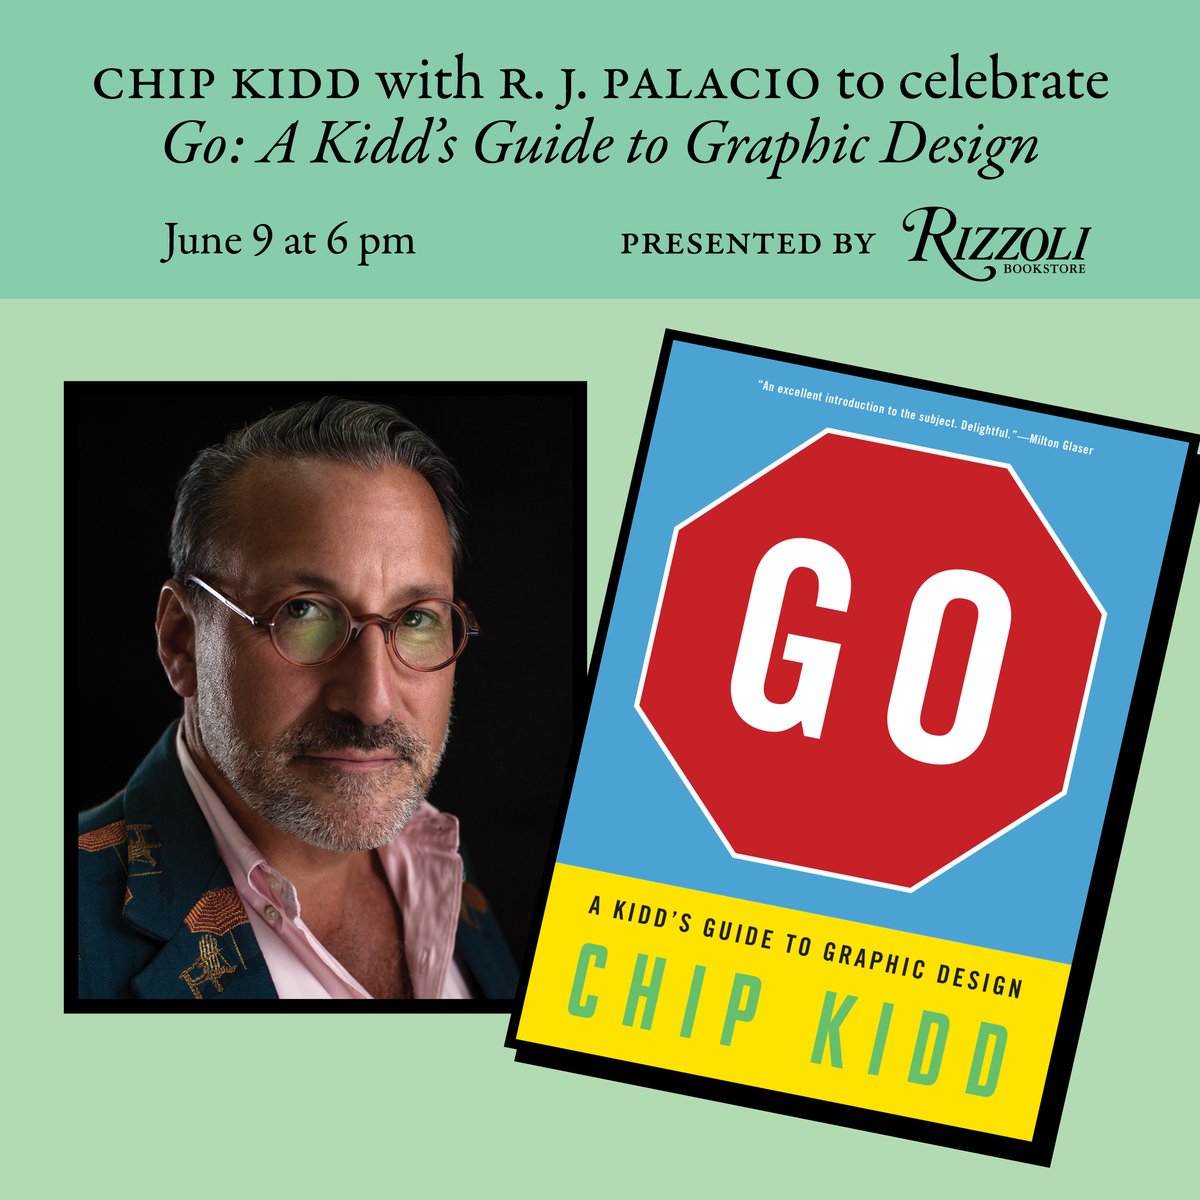 Join renowned graphic designer @chipkidd and bestselling novelist @RJPalacio for a special discussion to celebrate the paperback launch of Go: A Kidd’s Guide to Graphic Design! When: Thursday, June 9 at 6PM Where: Rizzoli Bookstore, 1133 Broadway, New York